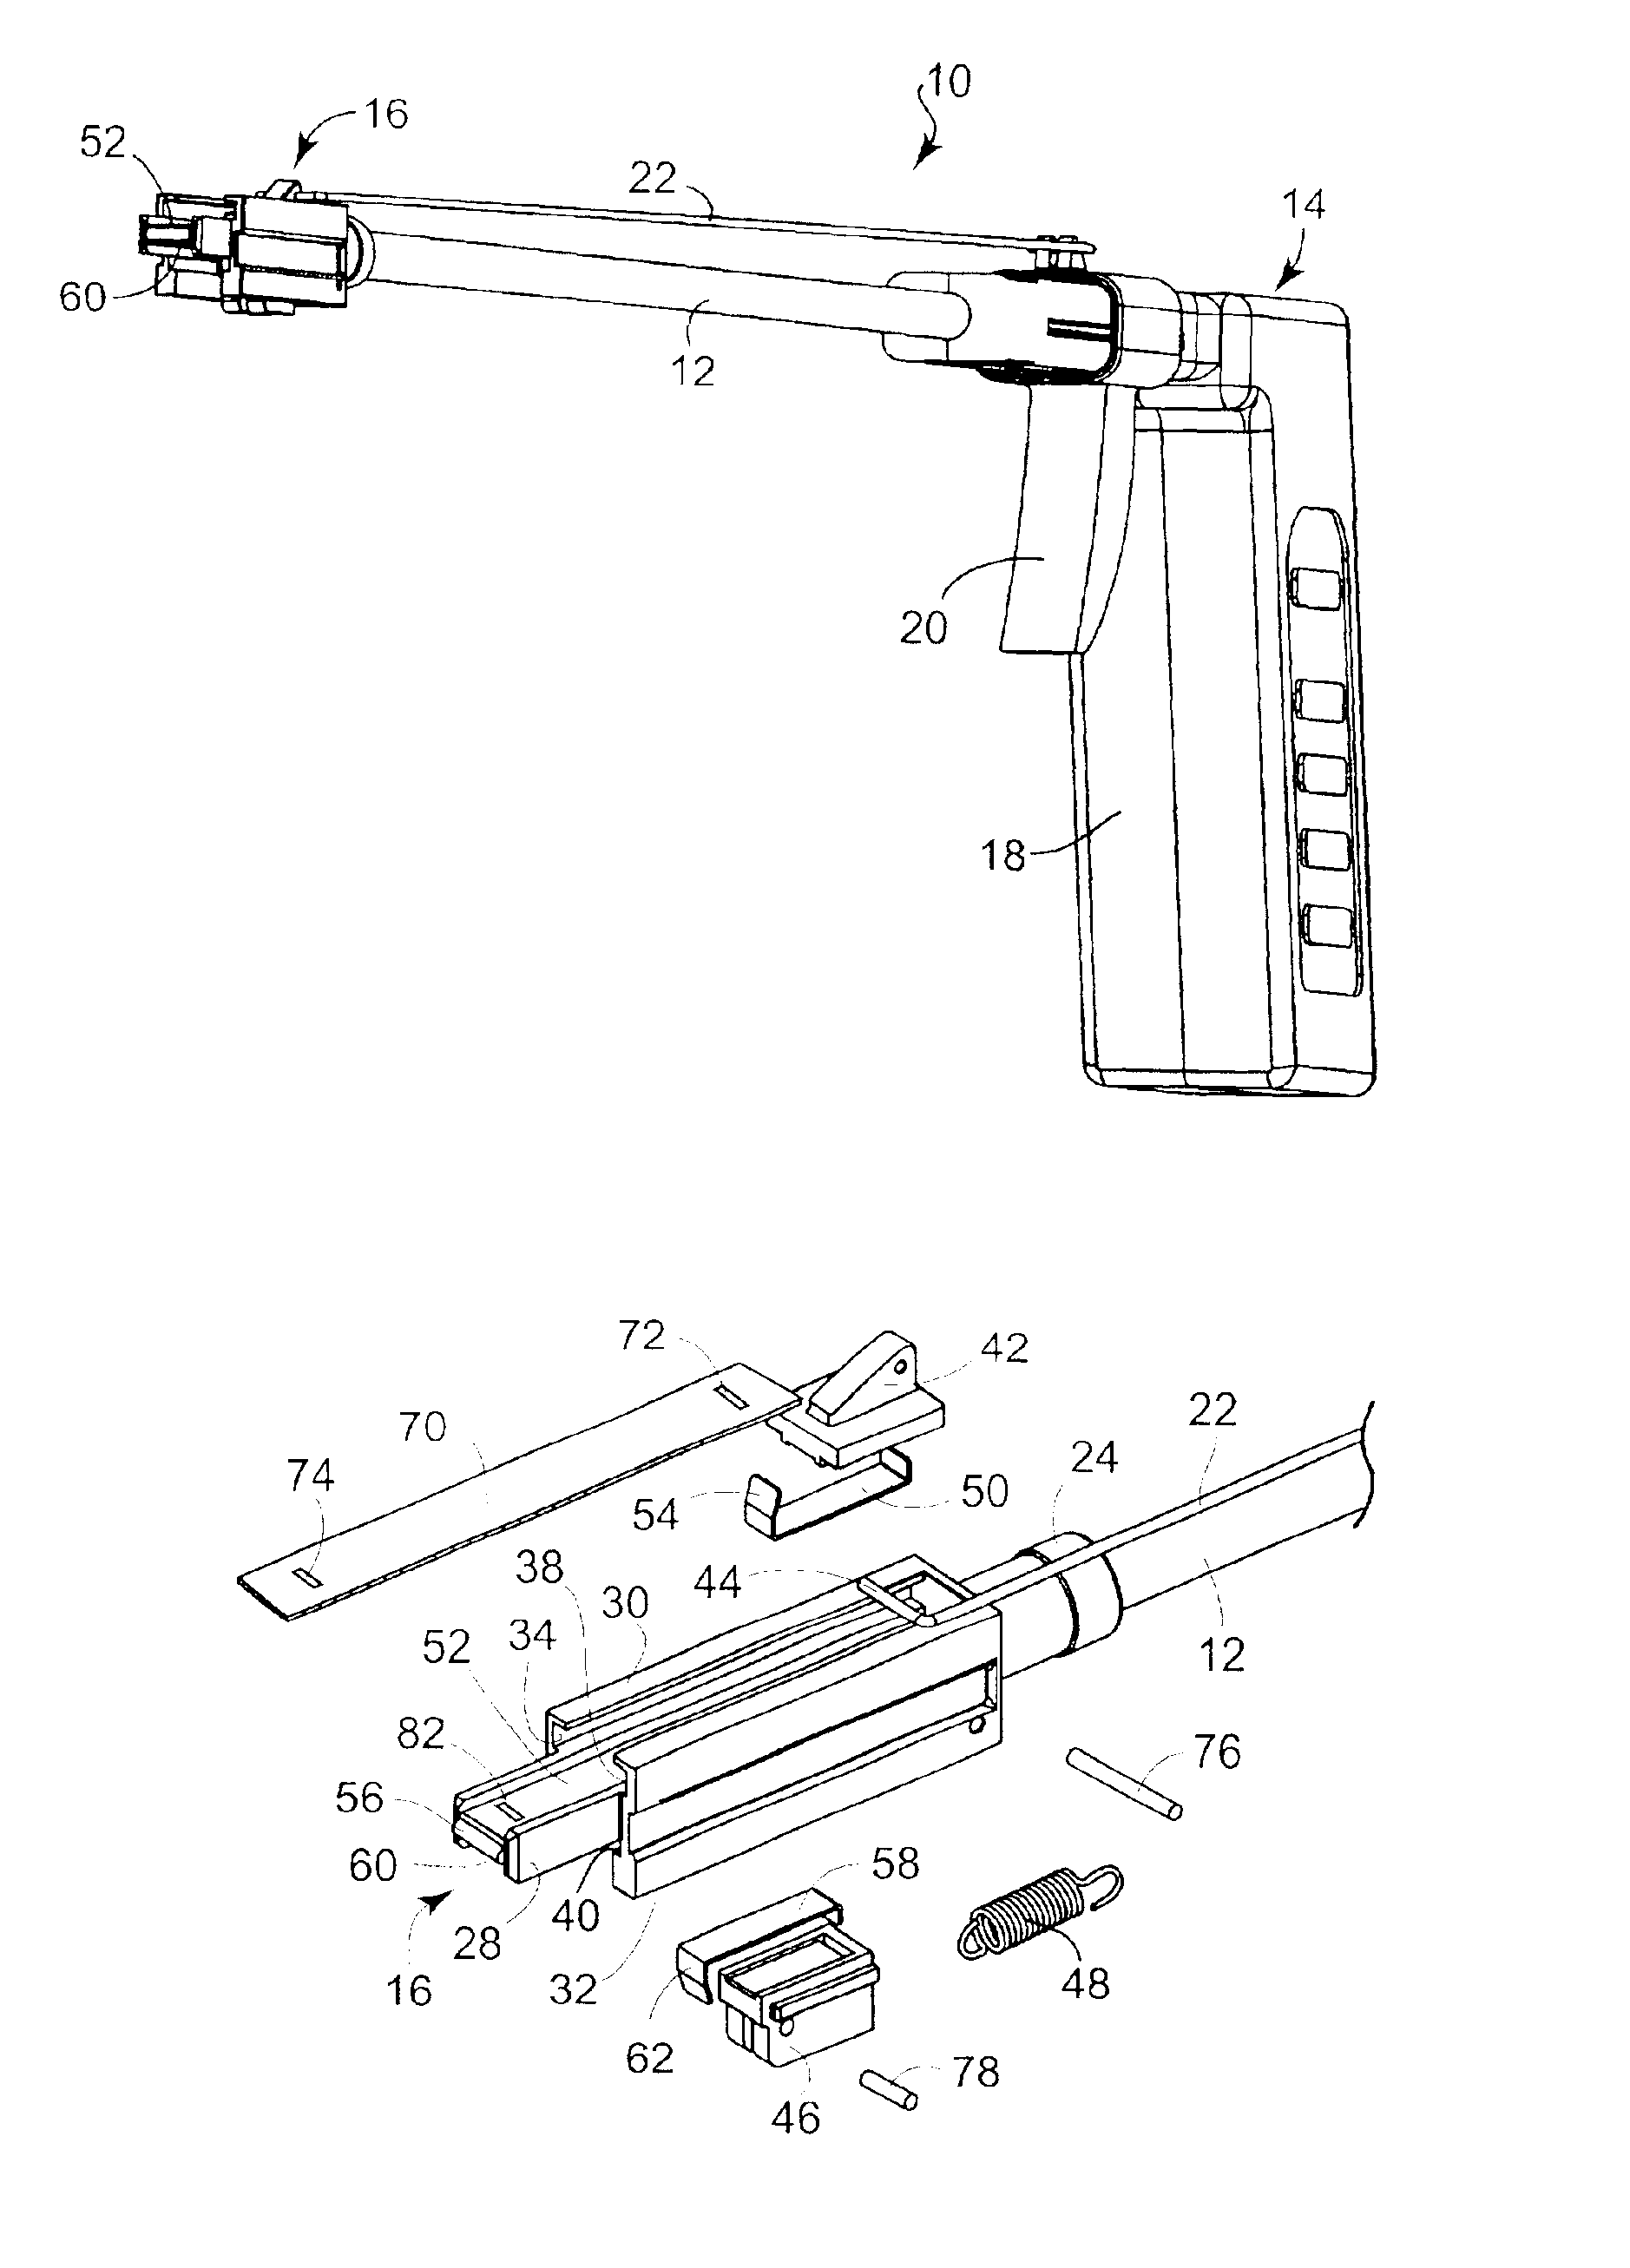 Article and process for cleaning optical surfaces